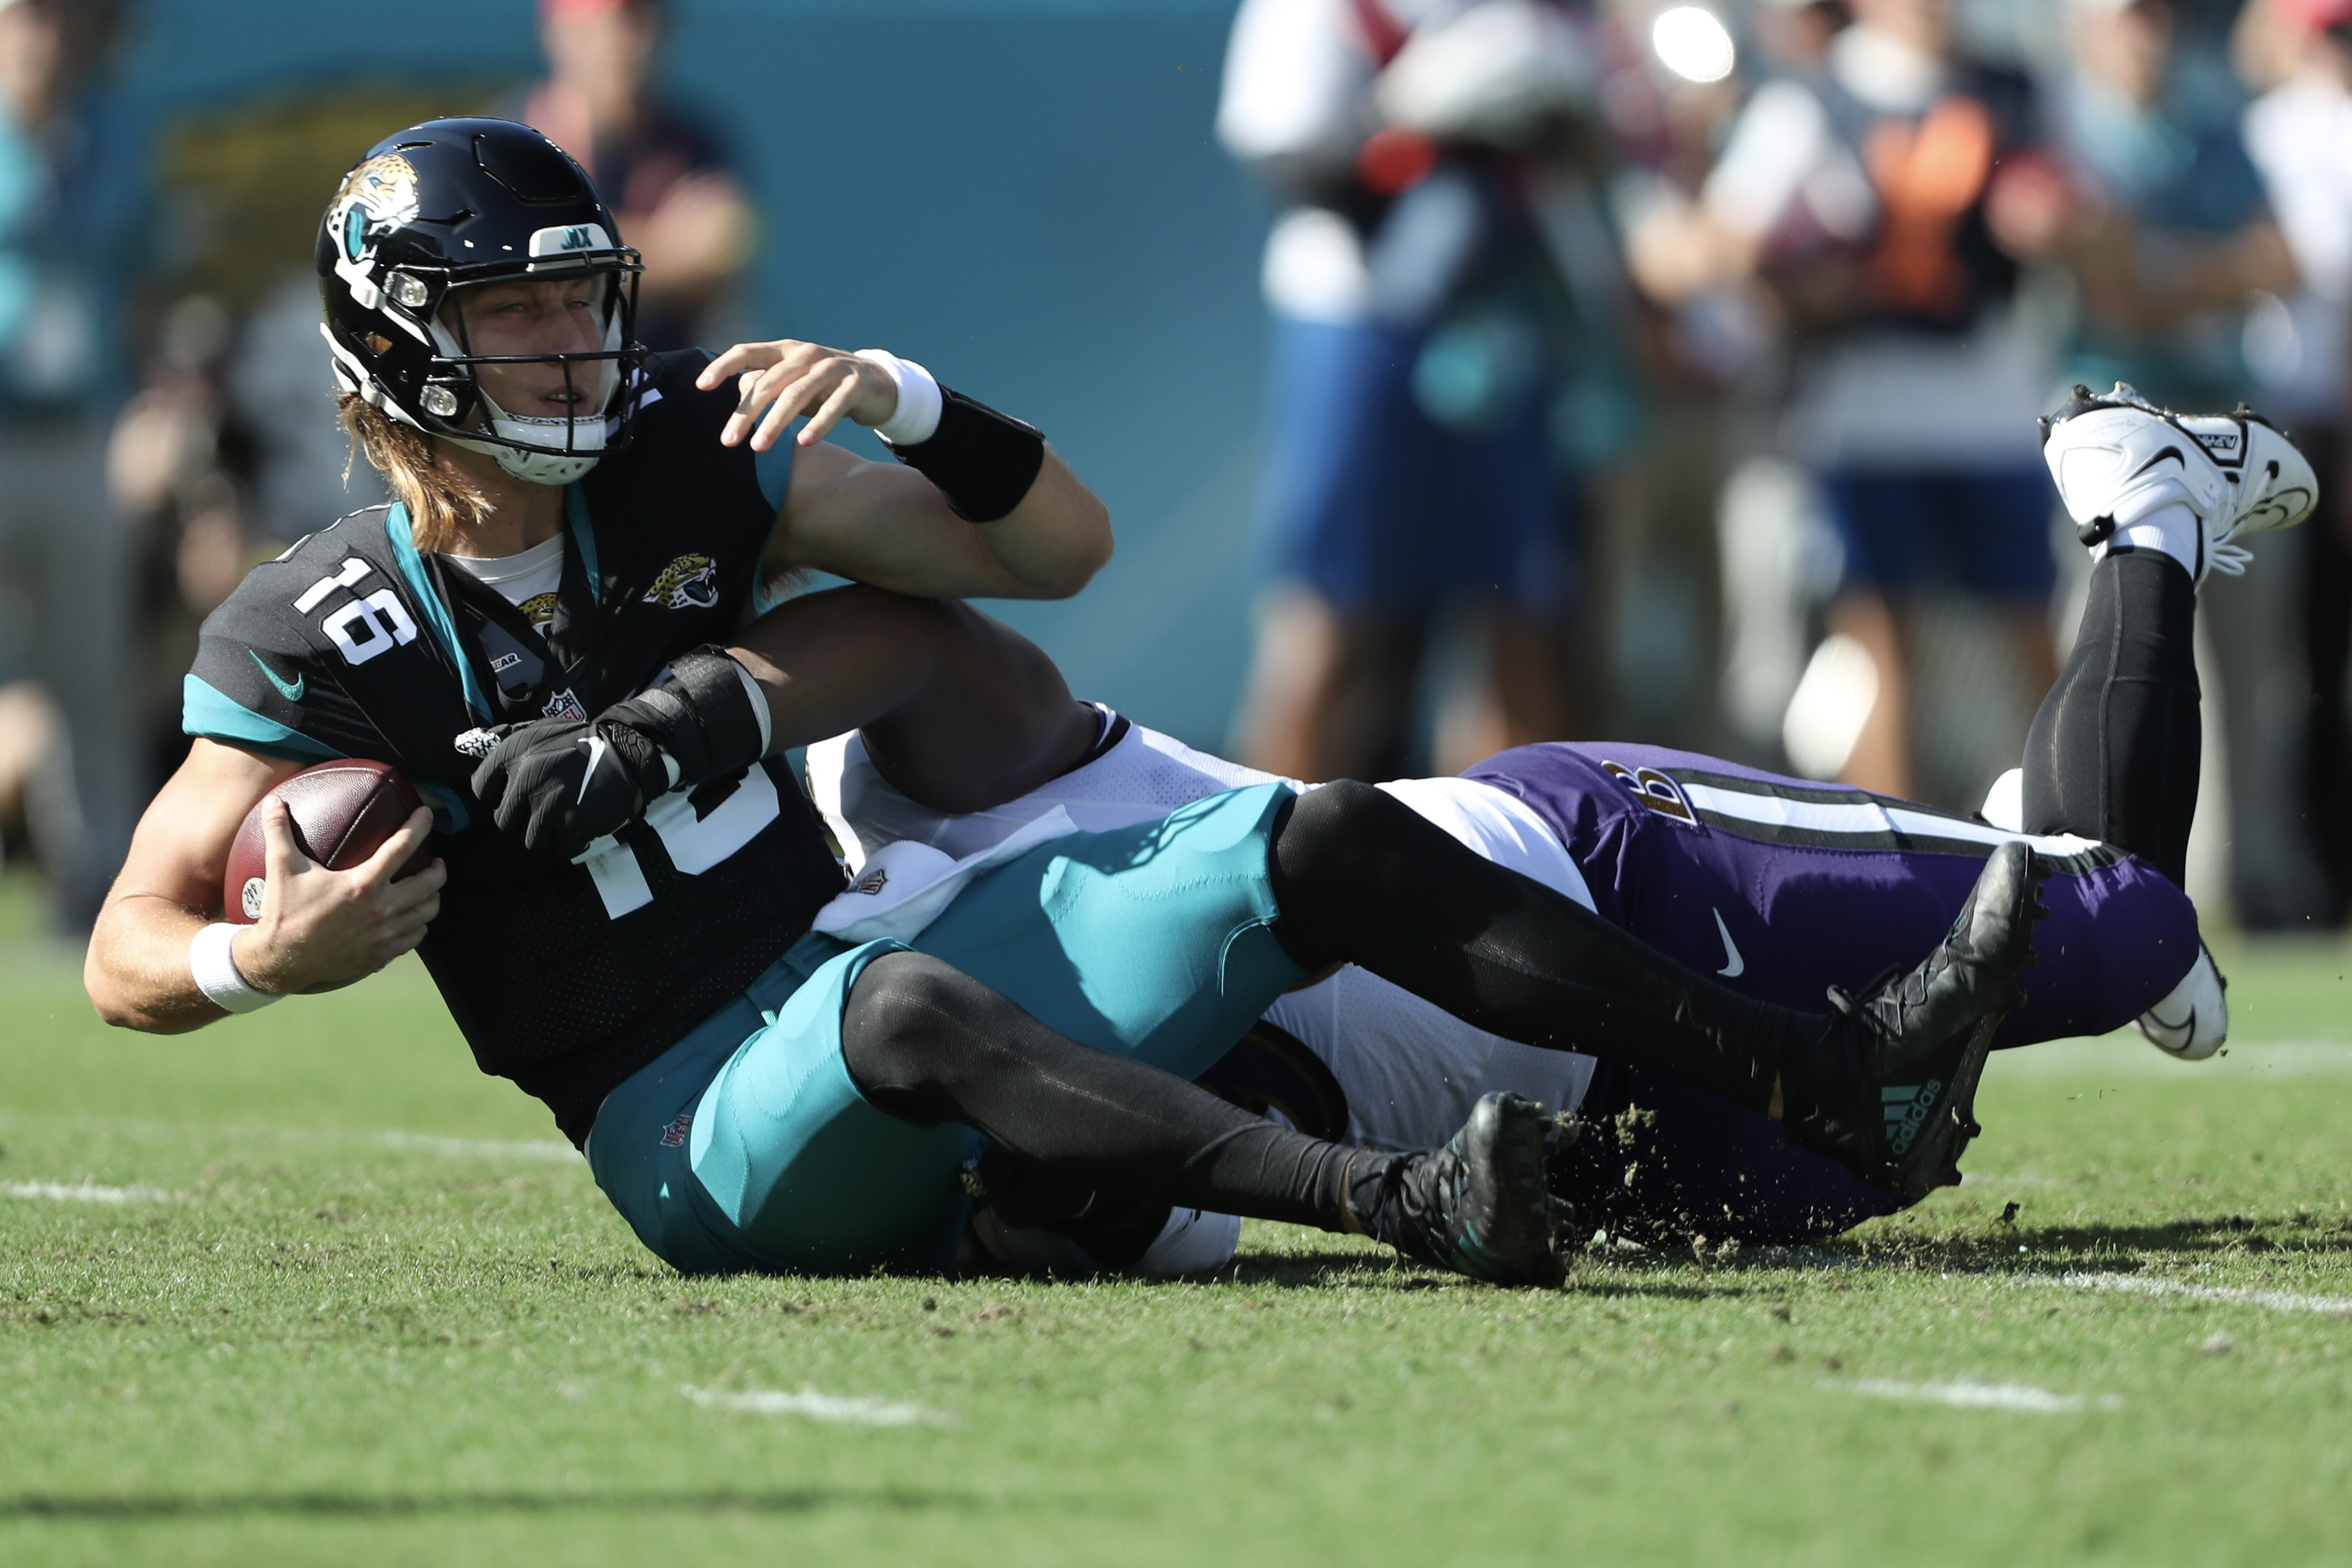 Trevor Lawrence #16 of the Jacksonville Jaguars is sacked by Broderick Washington #96 of the Baltimore Ravens during the first half at TIAA Bank Field on November 27, 2022 in Jacksonville, Florida.